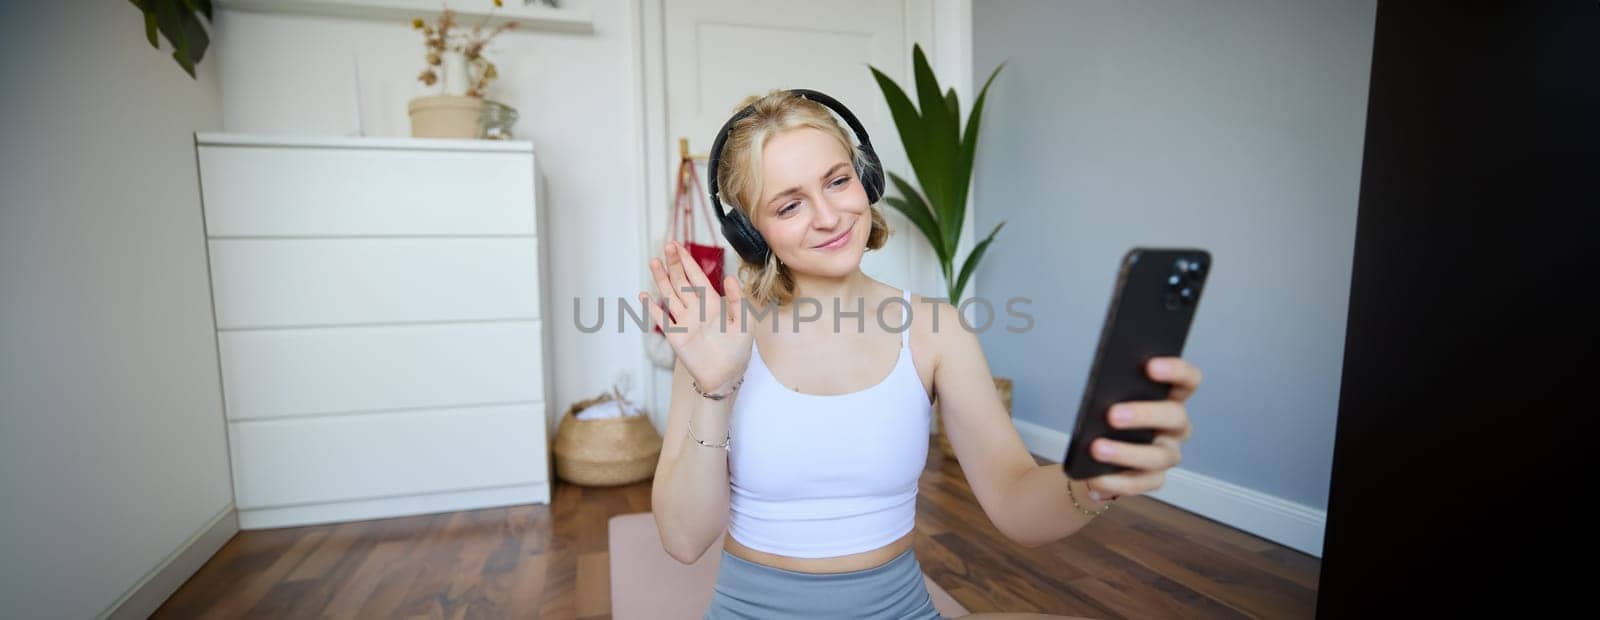 Portrait of young woman with smartphone and headphones, waving hand at mobile phone camera, live streaming during workout. Wellbeing and sport concept